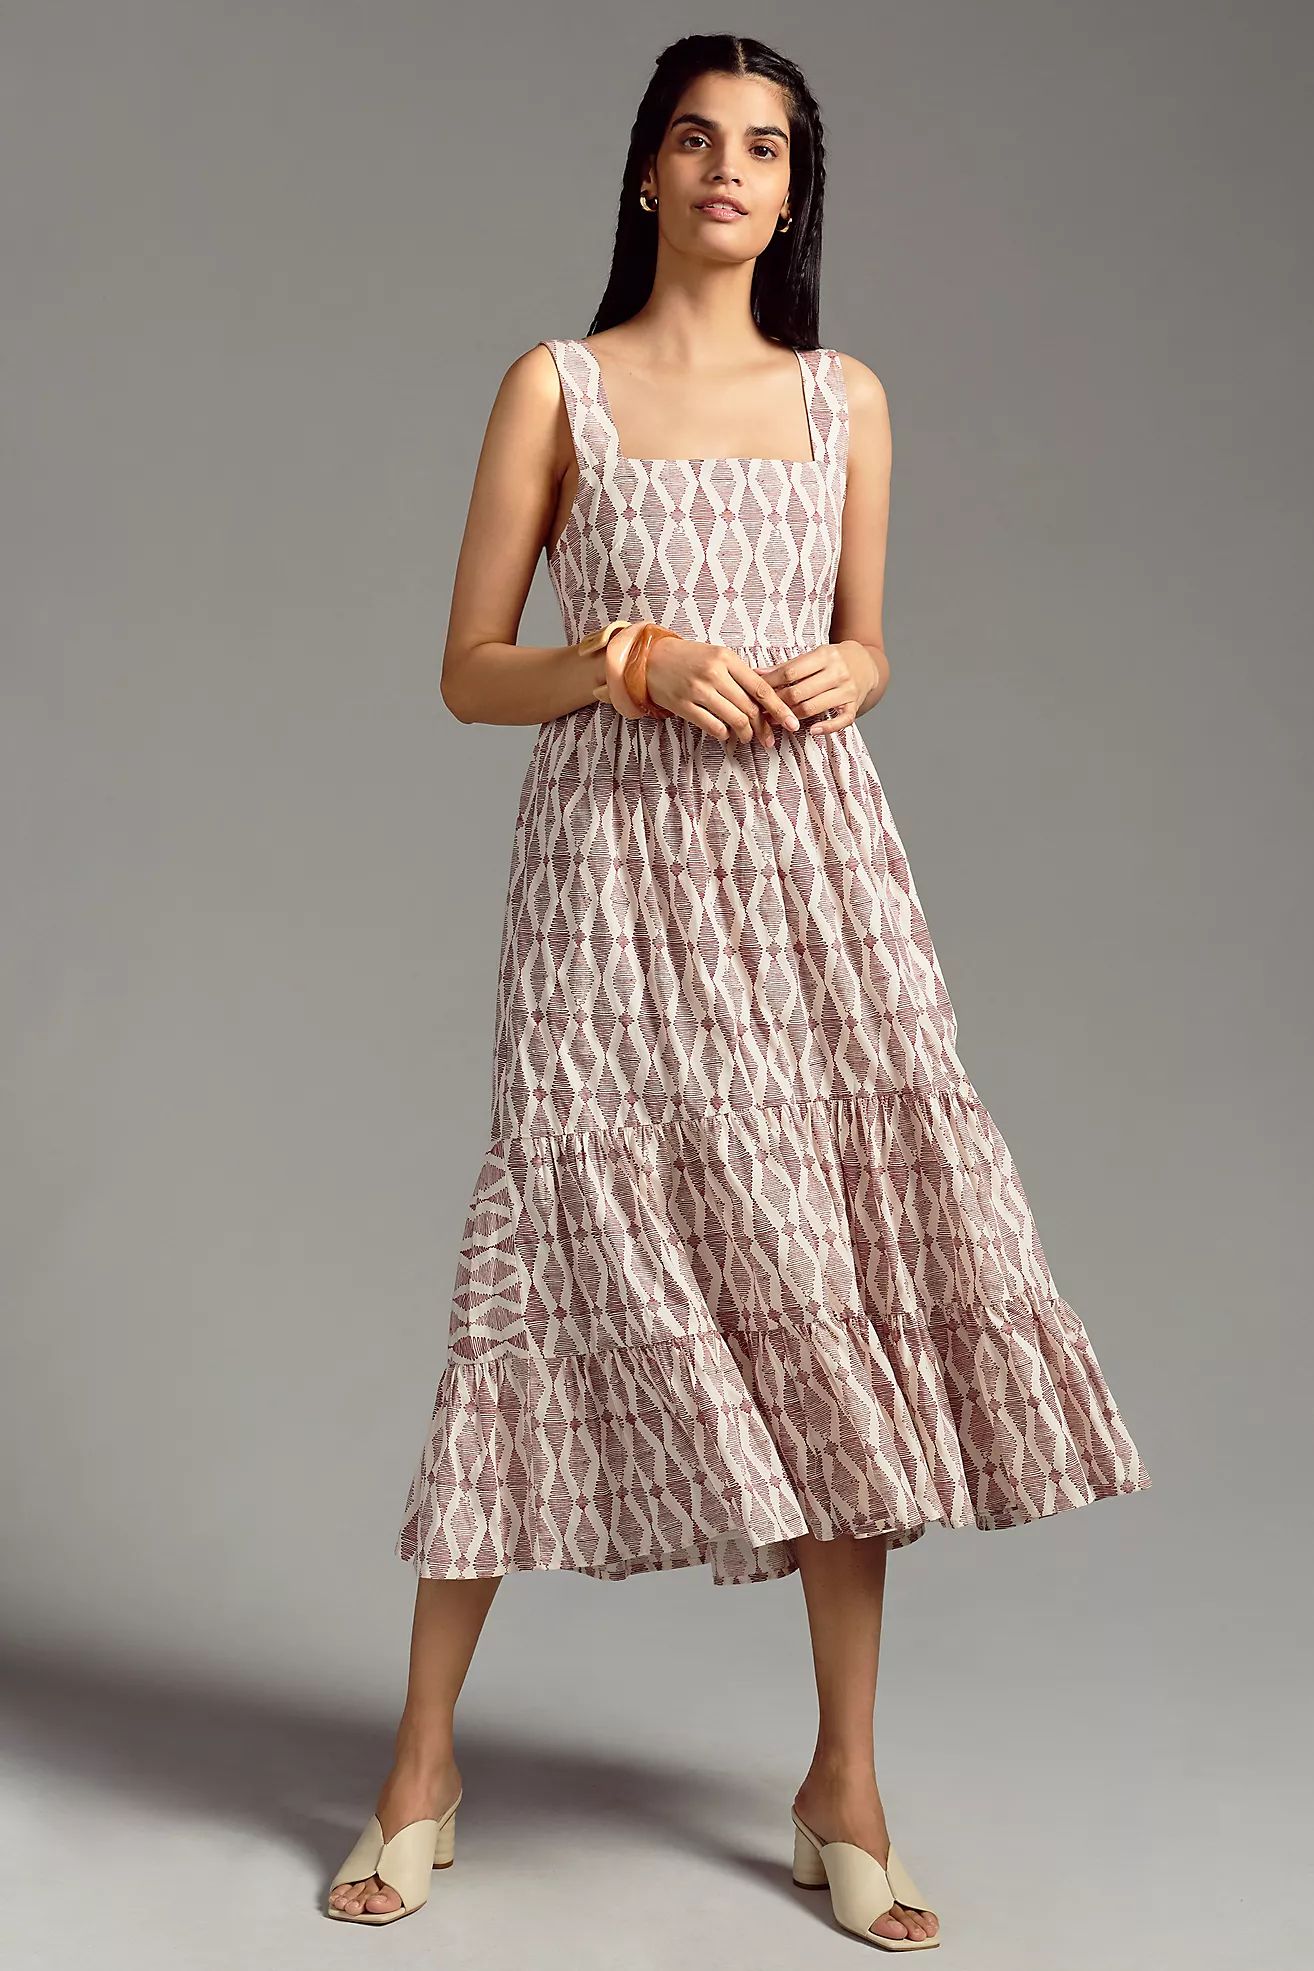 By Anthropologie Square-Neck Tiered Dress | Anthropologie (US)